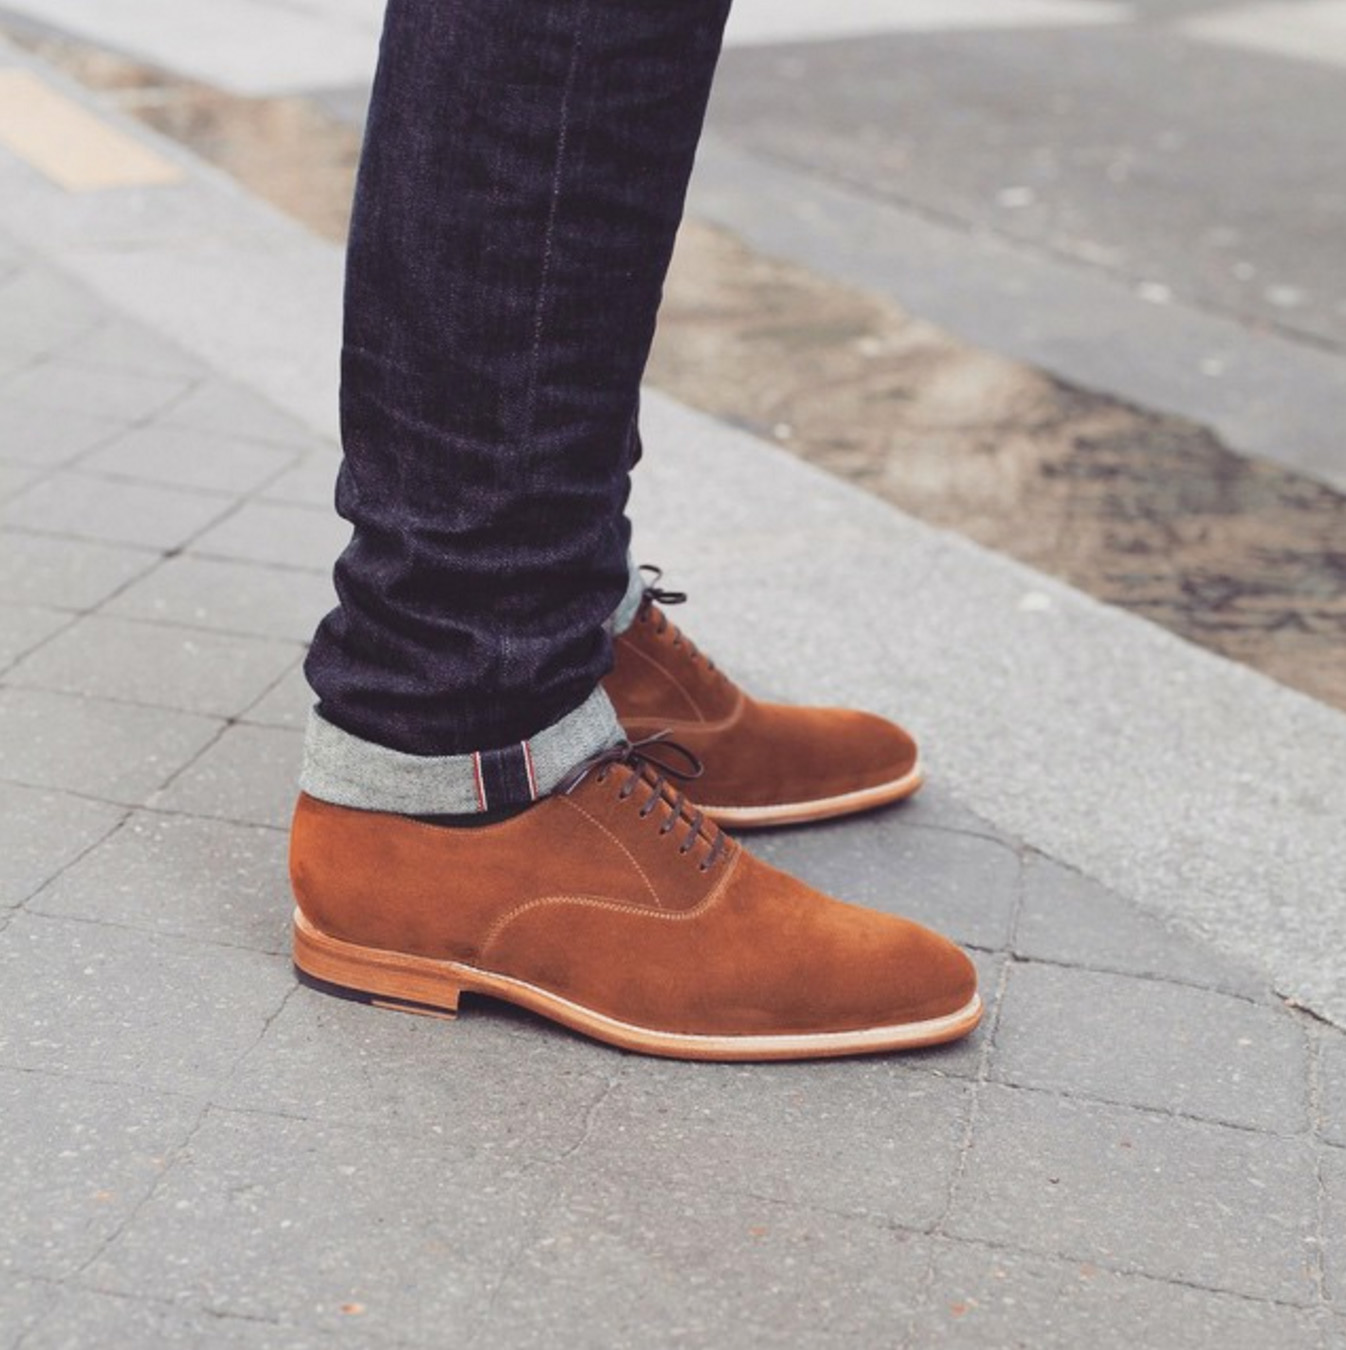 Preferred casual leather shoe style to wear with jeans? | Styleforum